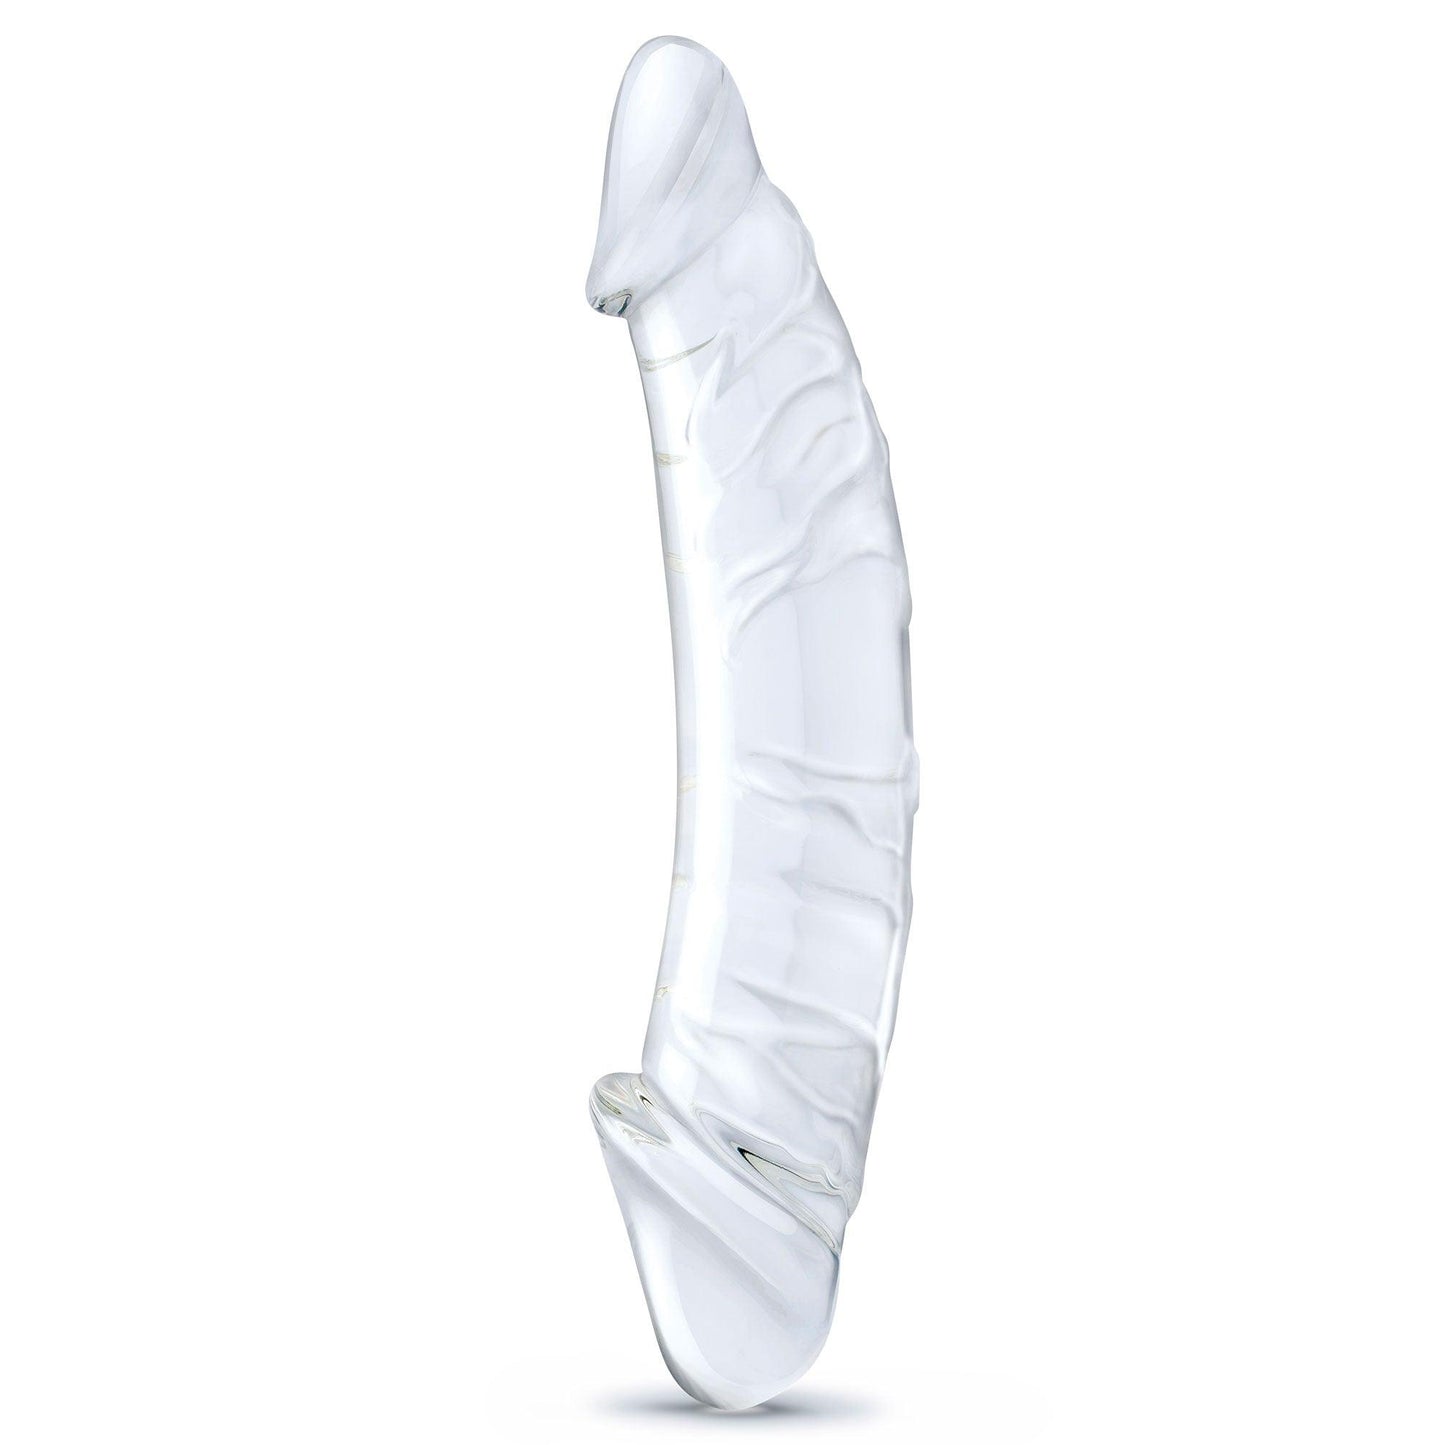 10.5 Inch Girthy Realistic Glass Double Dong - Clear - My Sex Toy Hub